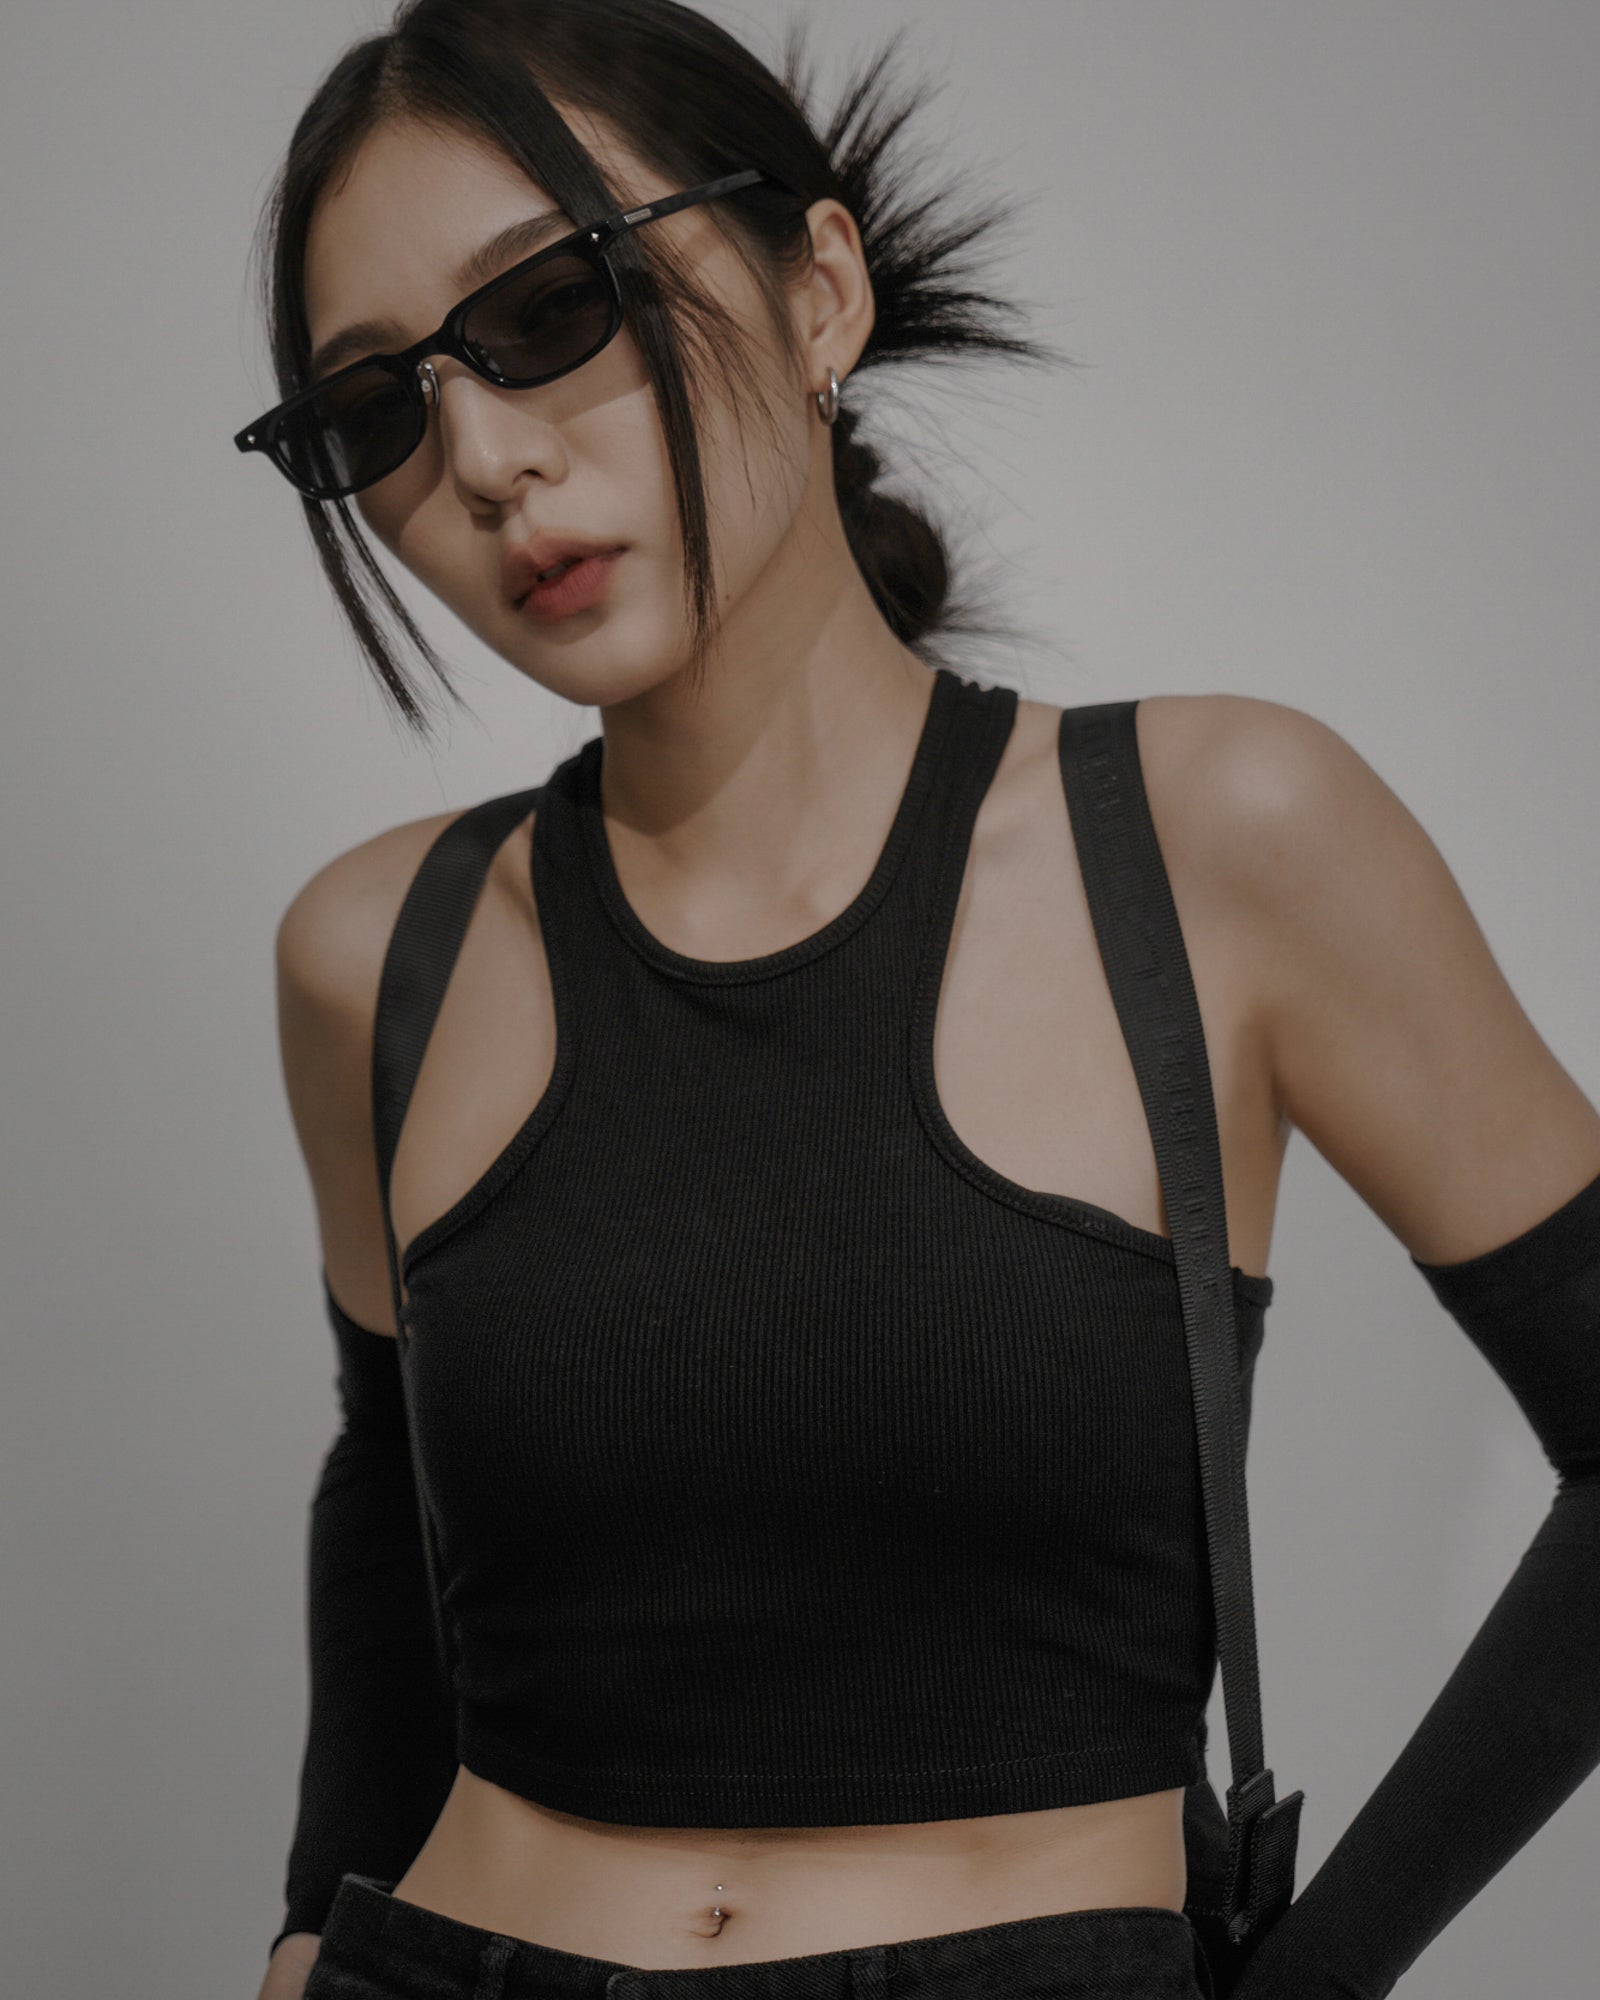 F01｜SUNGLASSES SERIES - univers hsieh